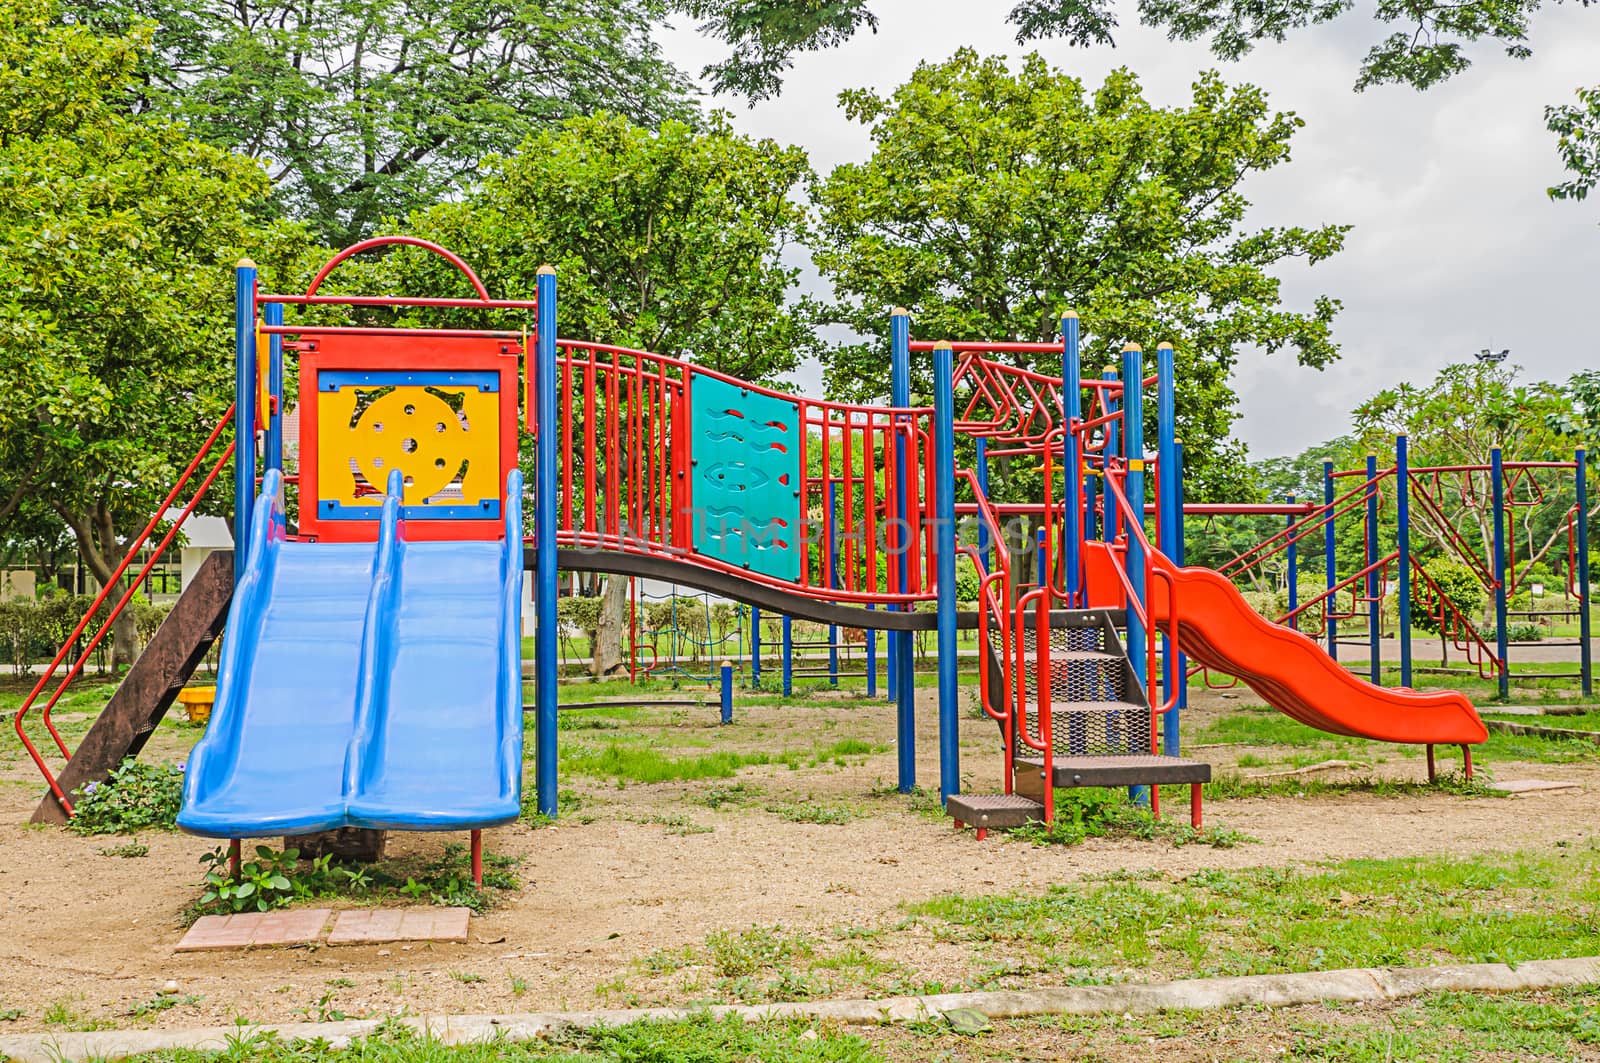 Colorful playground equipment in the public park